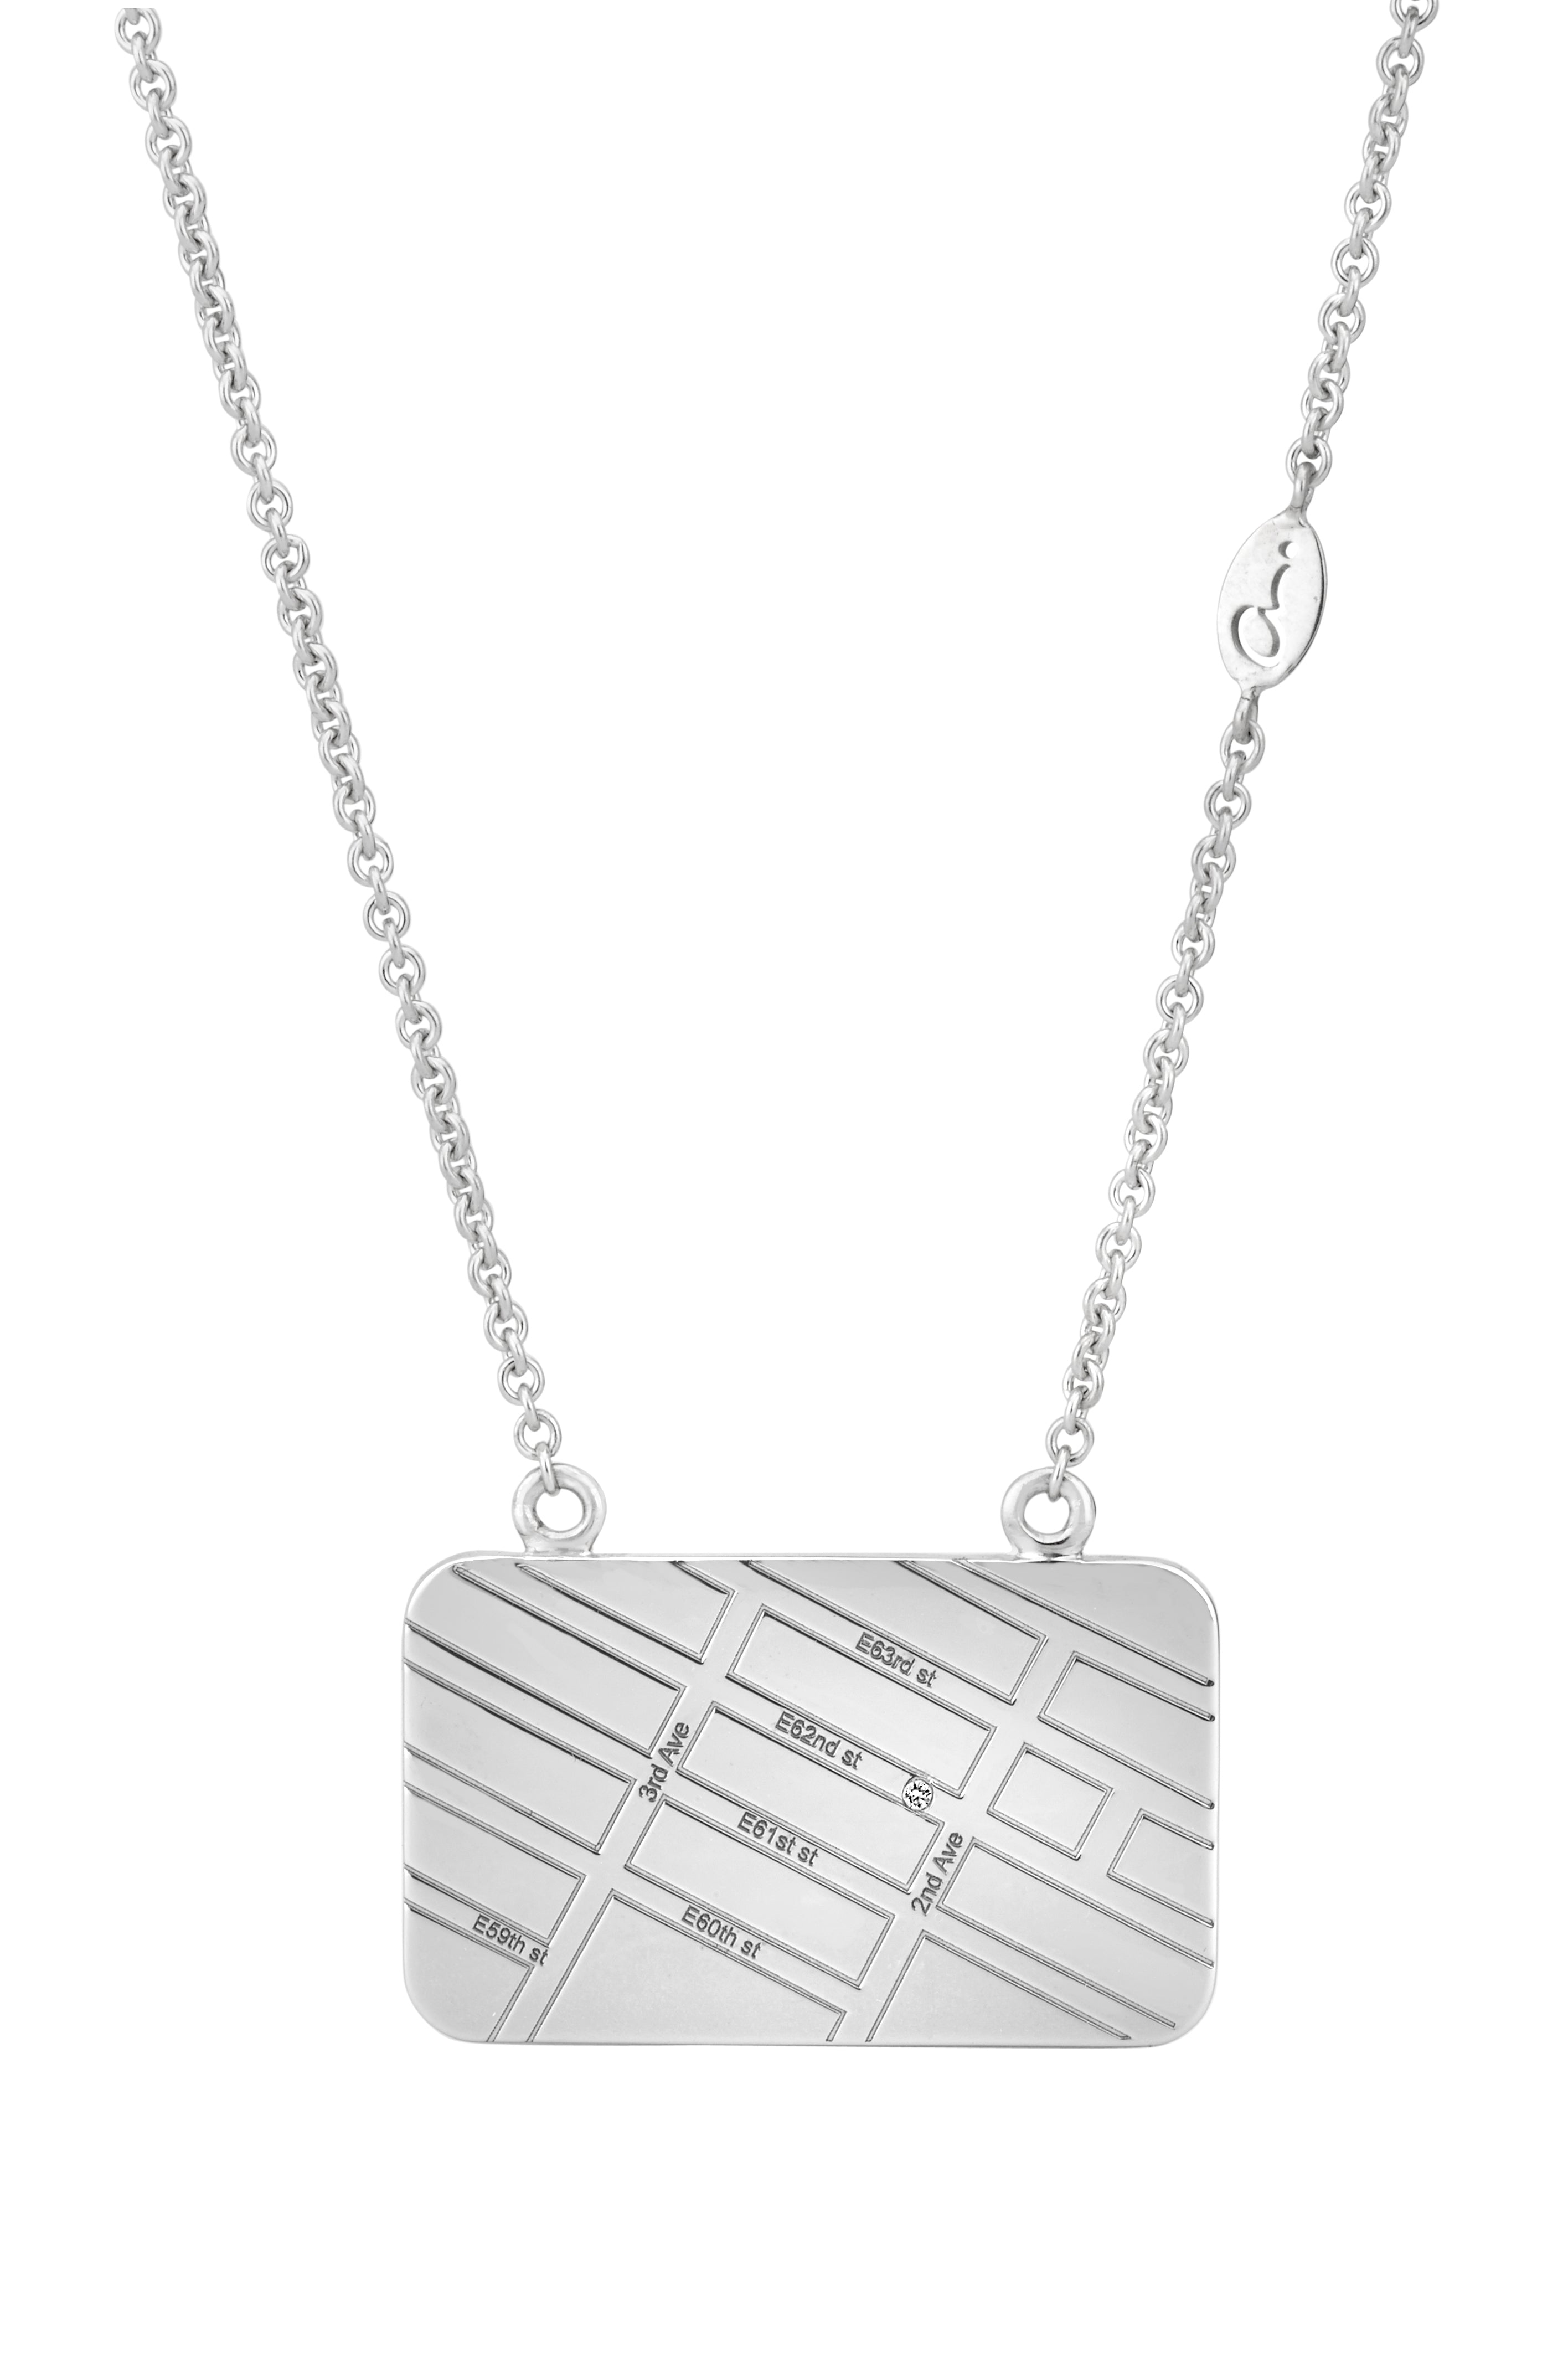 A.JAFFE  STERLING SILVER MAP NECKLACE